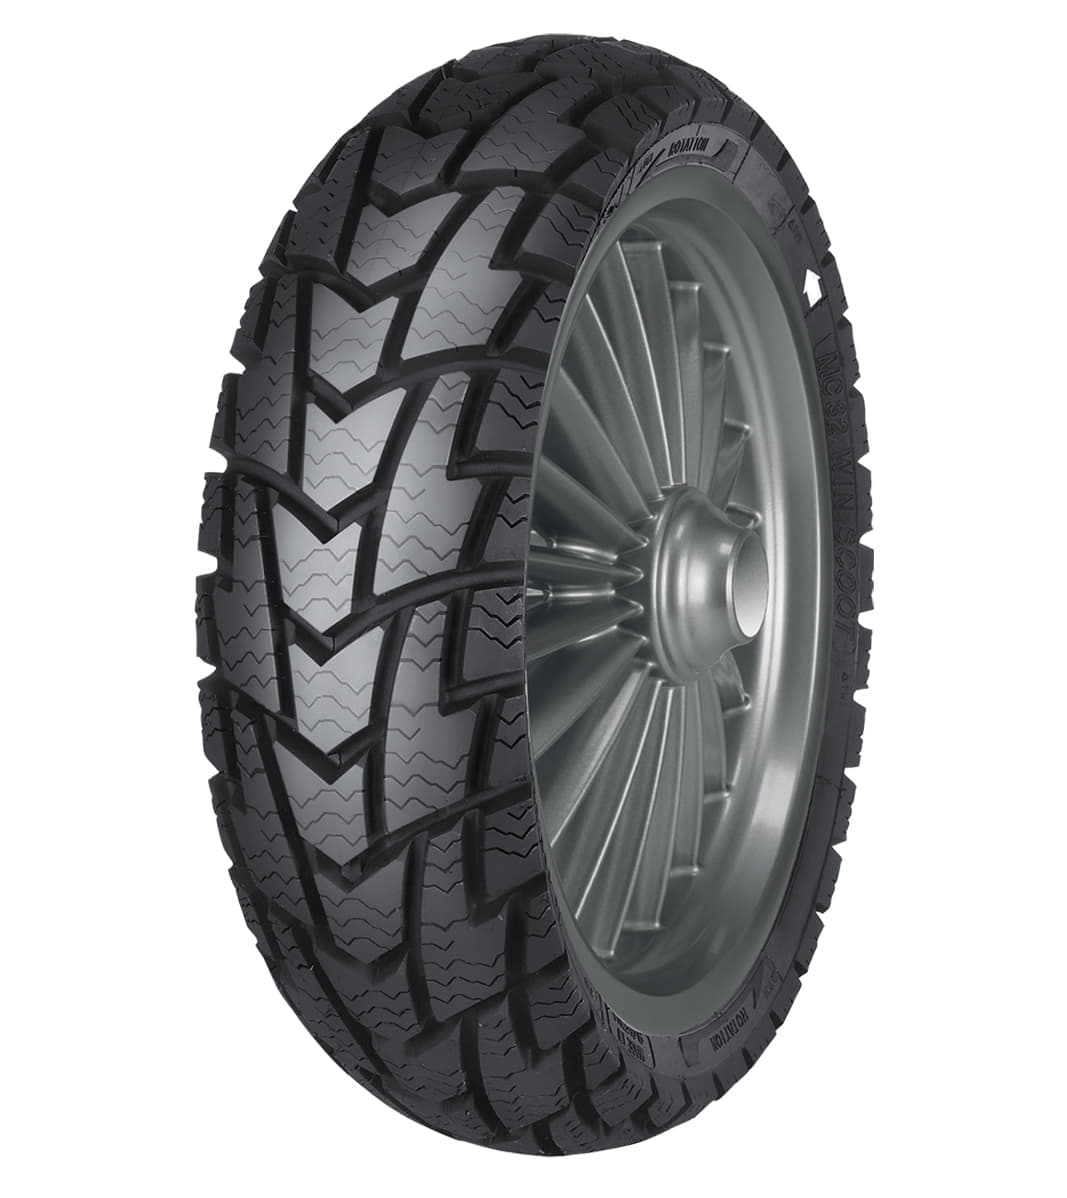 Mitas MC 32 WIN SCOOT 100/80-16 Scooter Winter 50P Front, Rear Tire Motorcycle Tires Mitas 